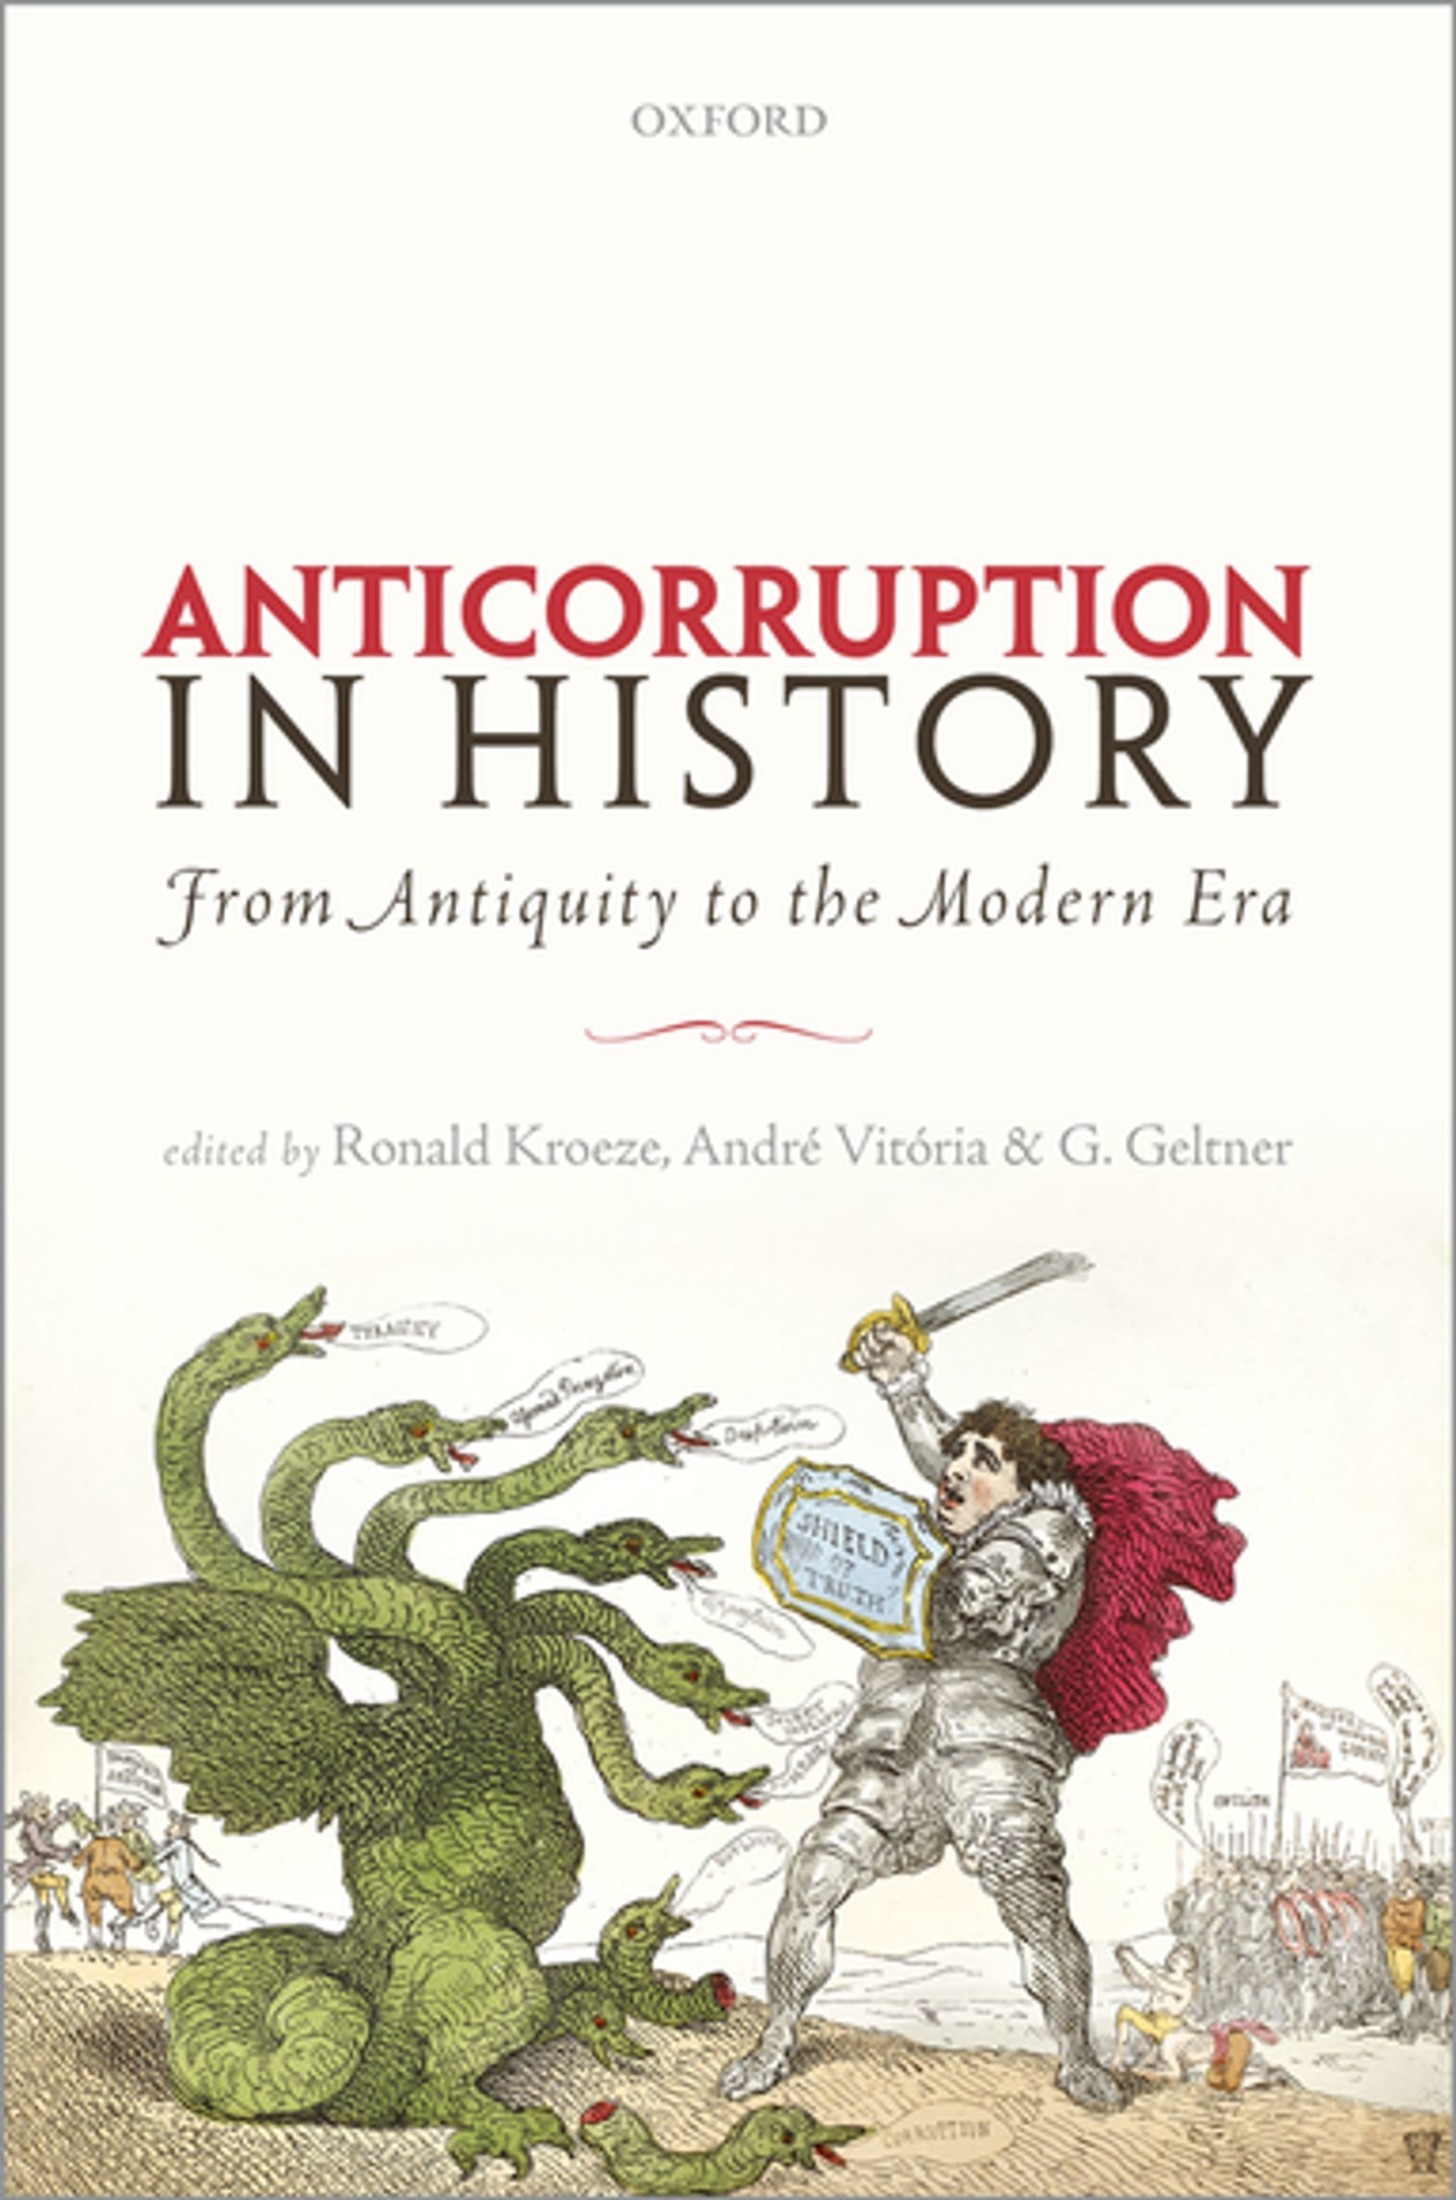 Anticorruption in History: From Antiquity to the Modern Era